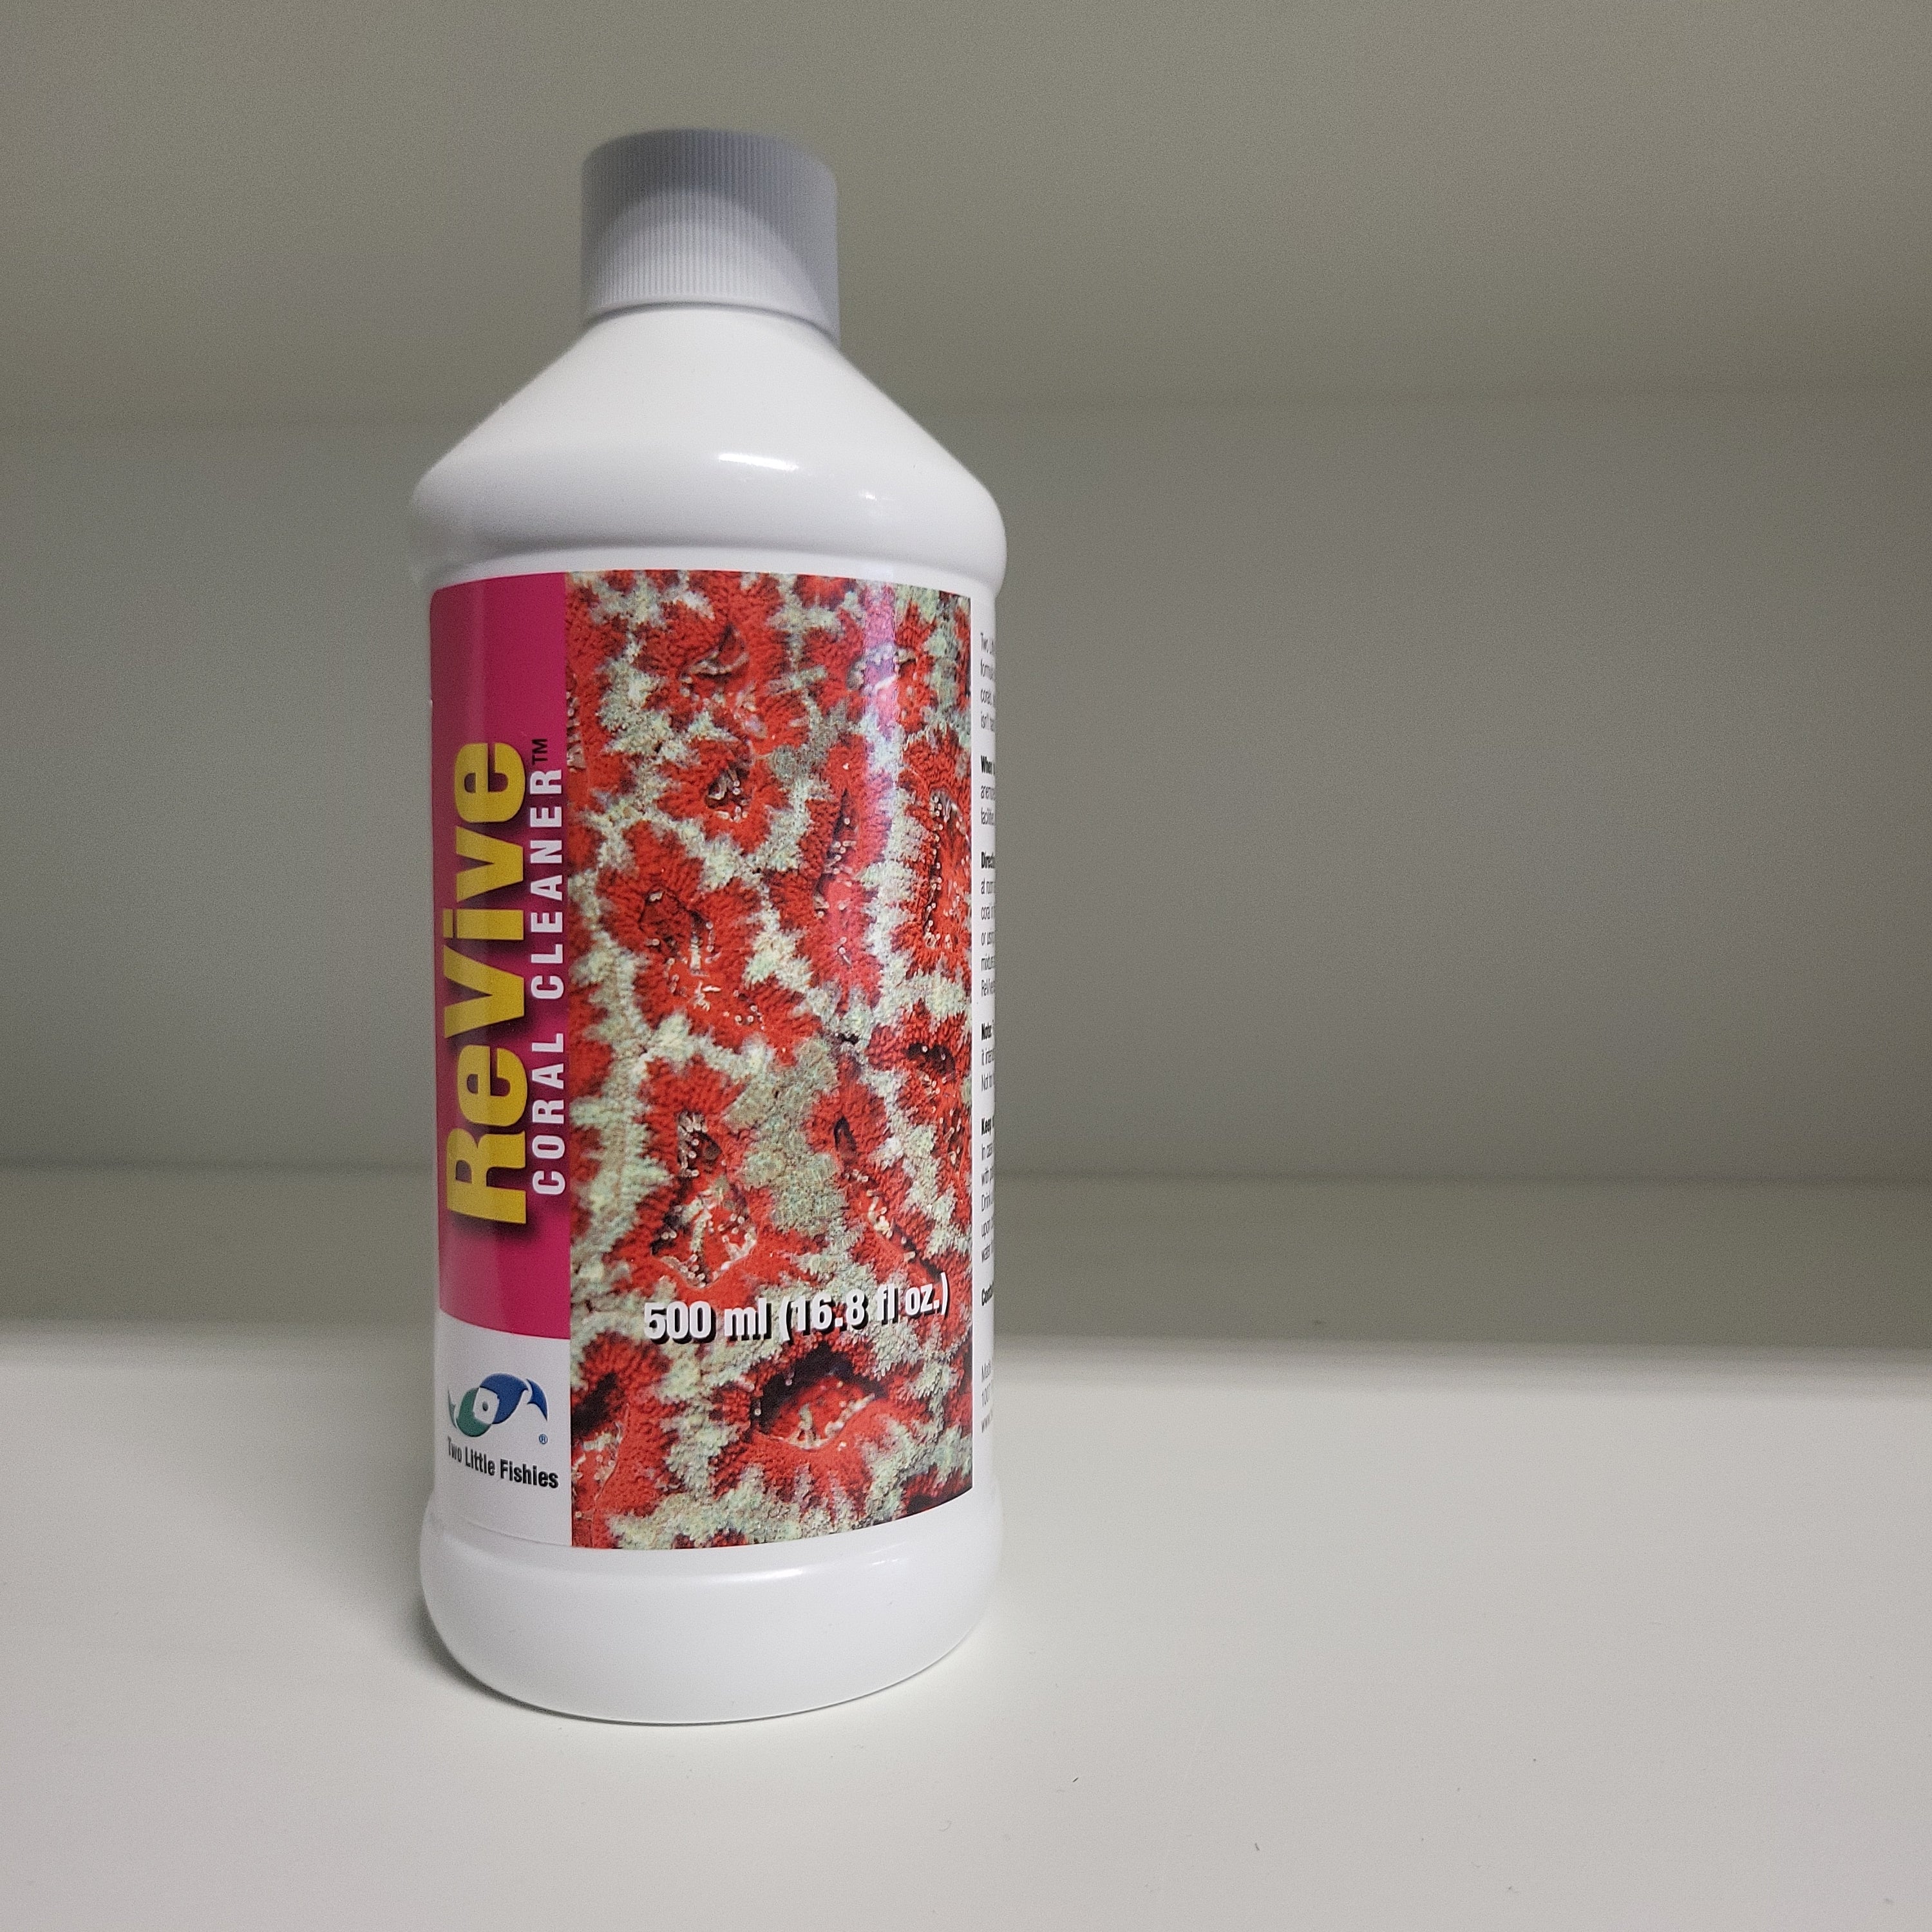 ReVive Coral Cleaner